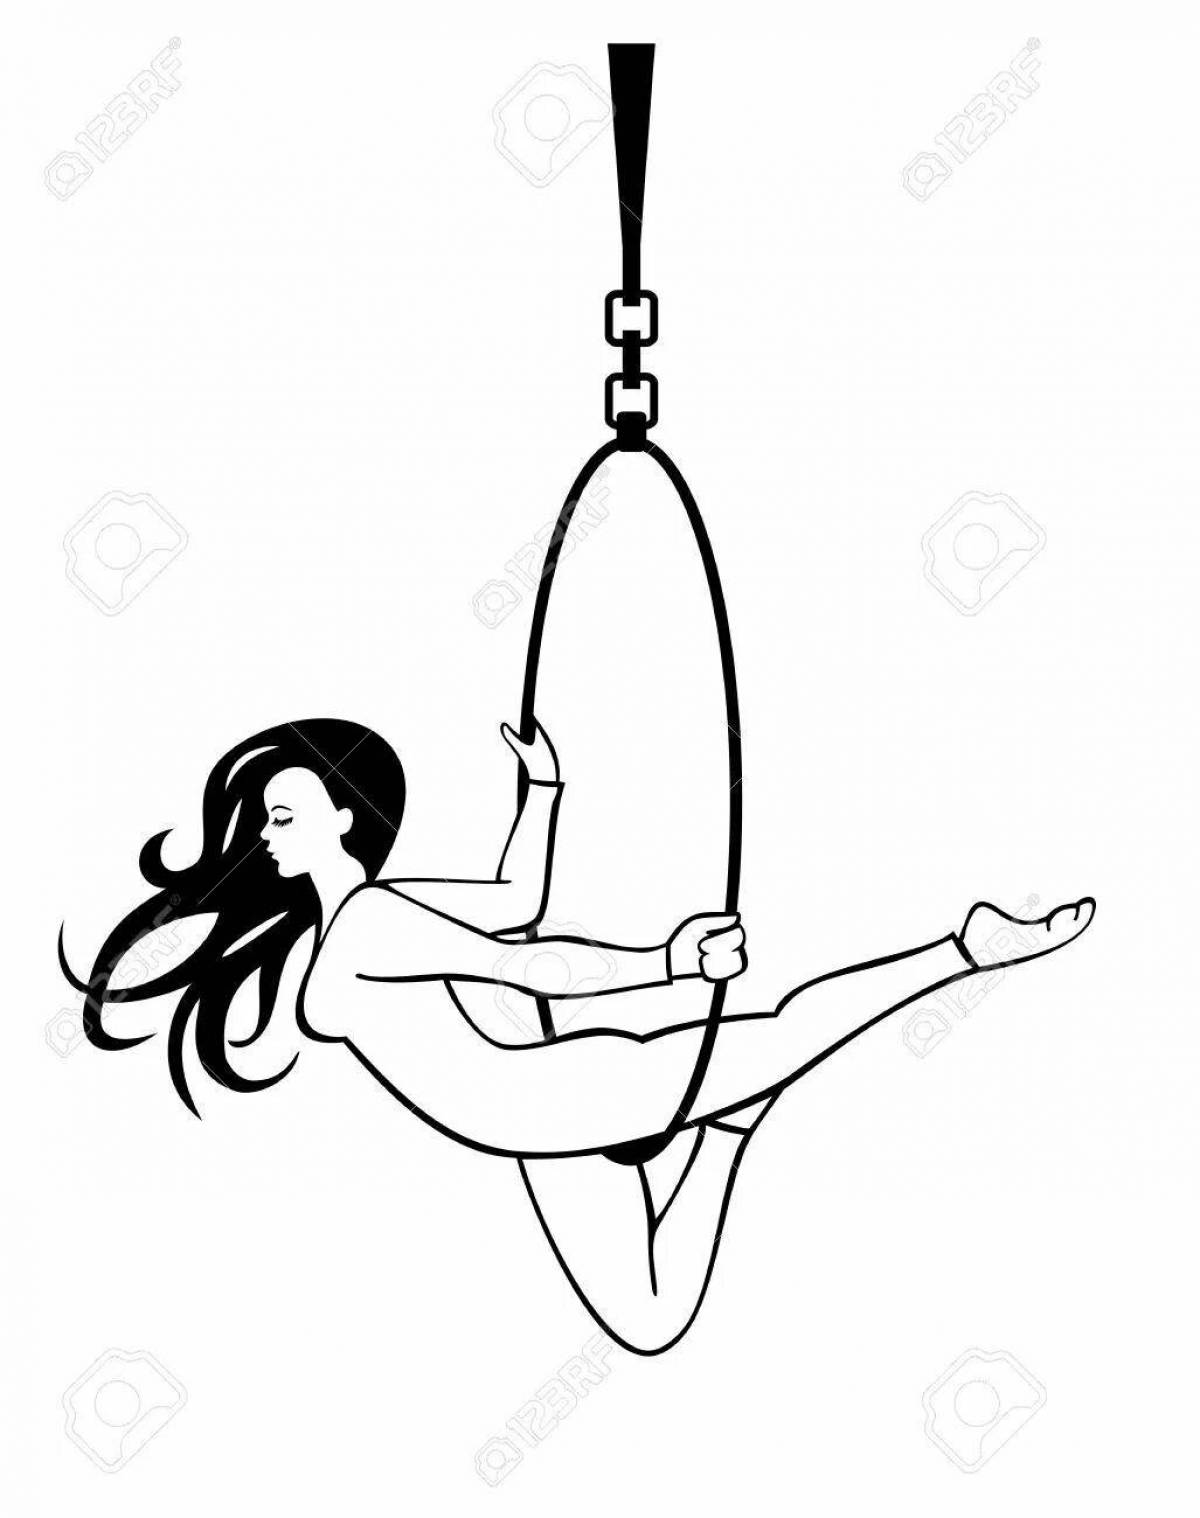 Coloring page stylish aerialist